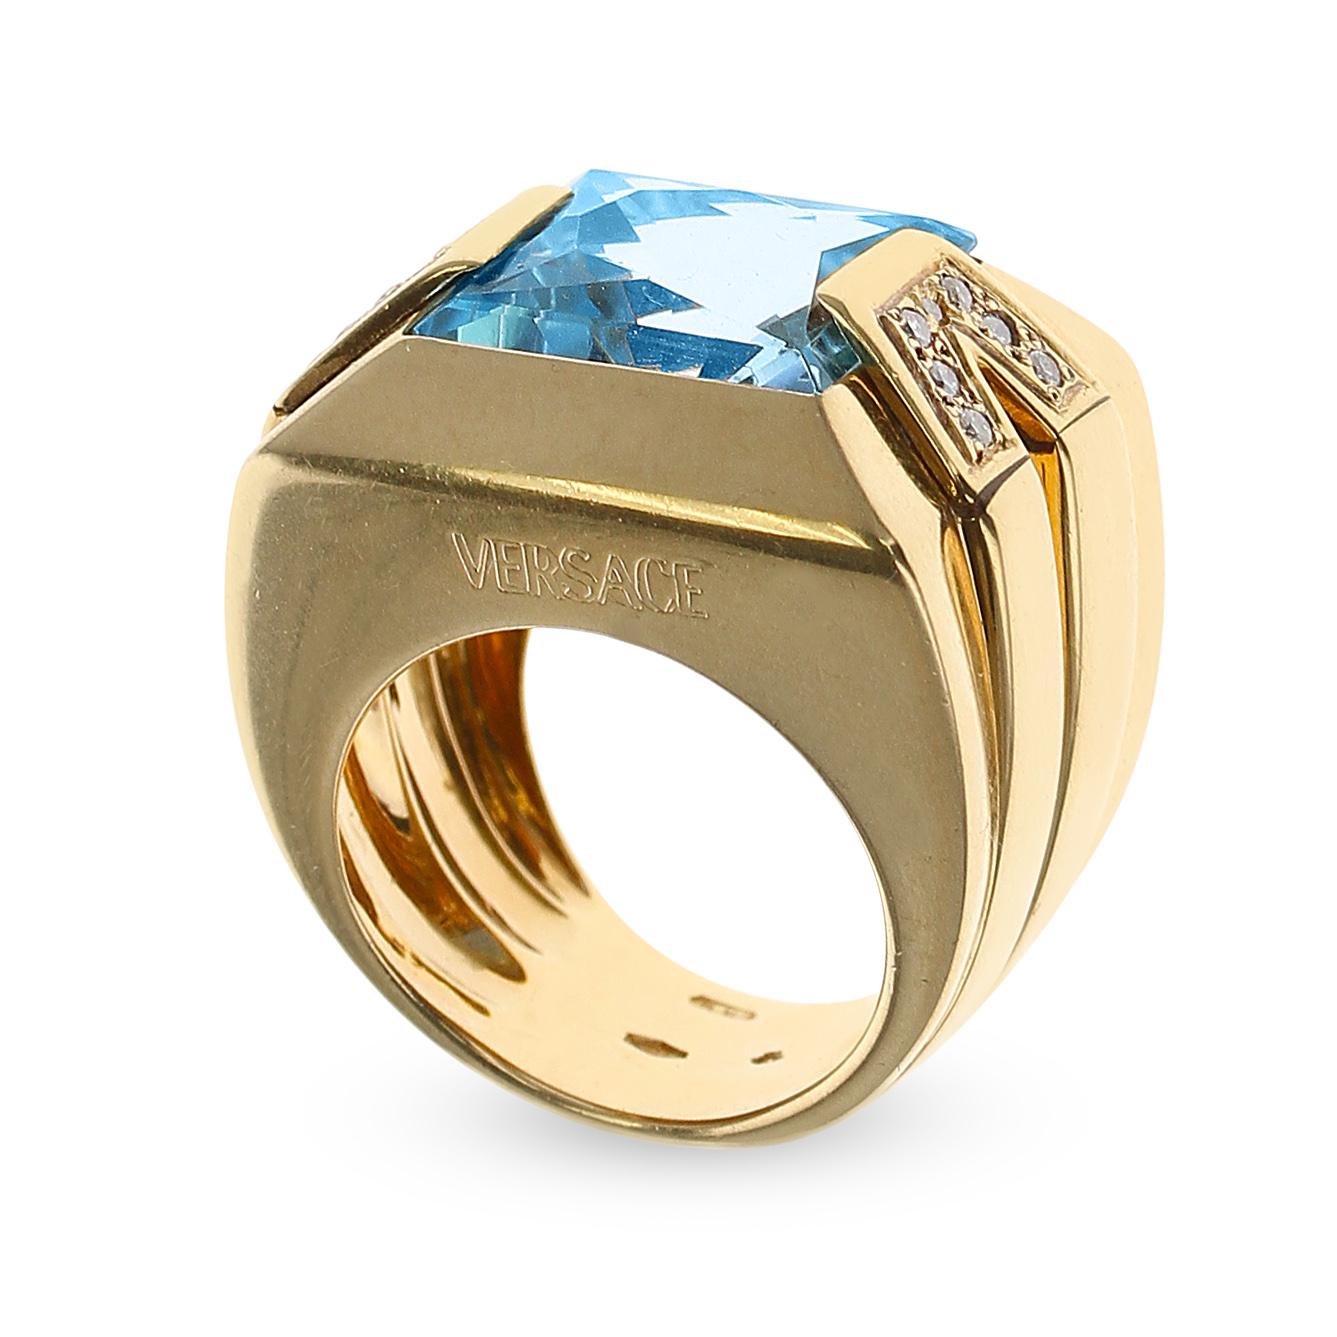 A bold Versace Rectangular Blue Topaz and Diamond Cocktail Ring made in 18K Yellow Gold. The Blue Topaz measures 12.50MM x 13.50MM
The Ring Size is US 6.50. The total weight of the ring is 20.31 grams. Stamped VERSACE.  